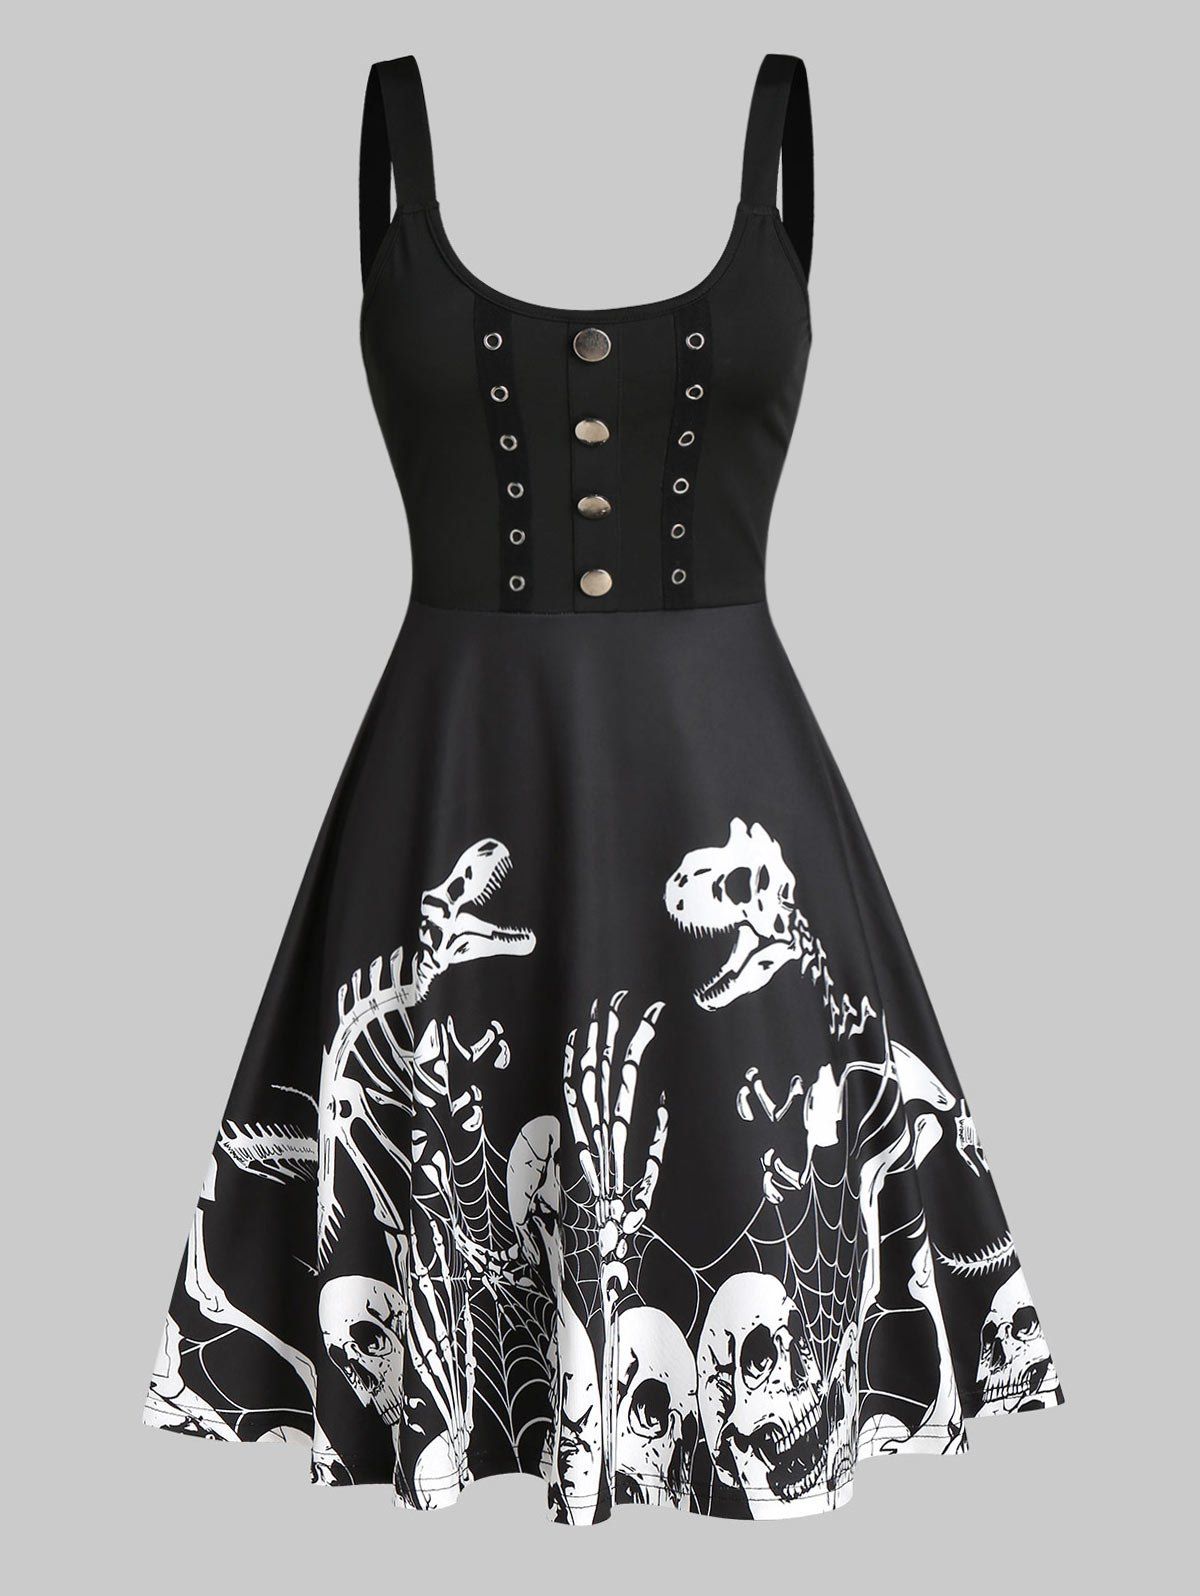 Button Skeleton Print Fit And Flare Gothic Dress - BLACK 2XL